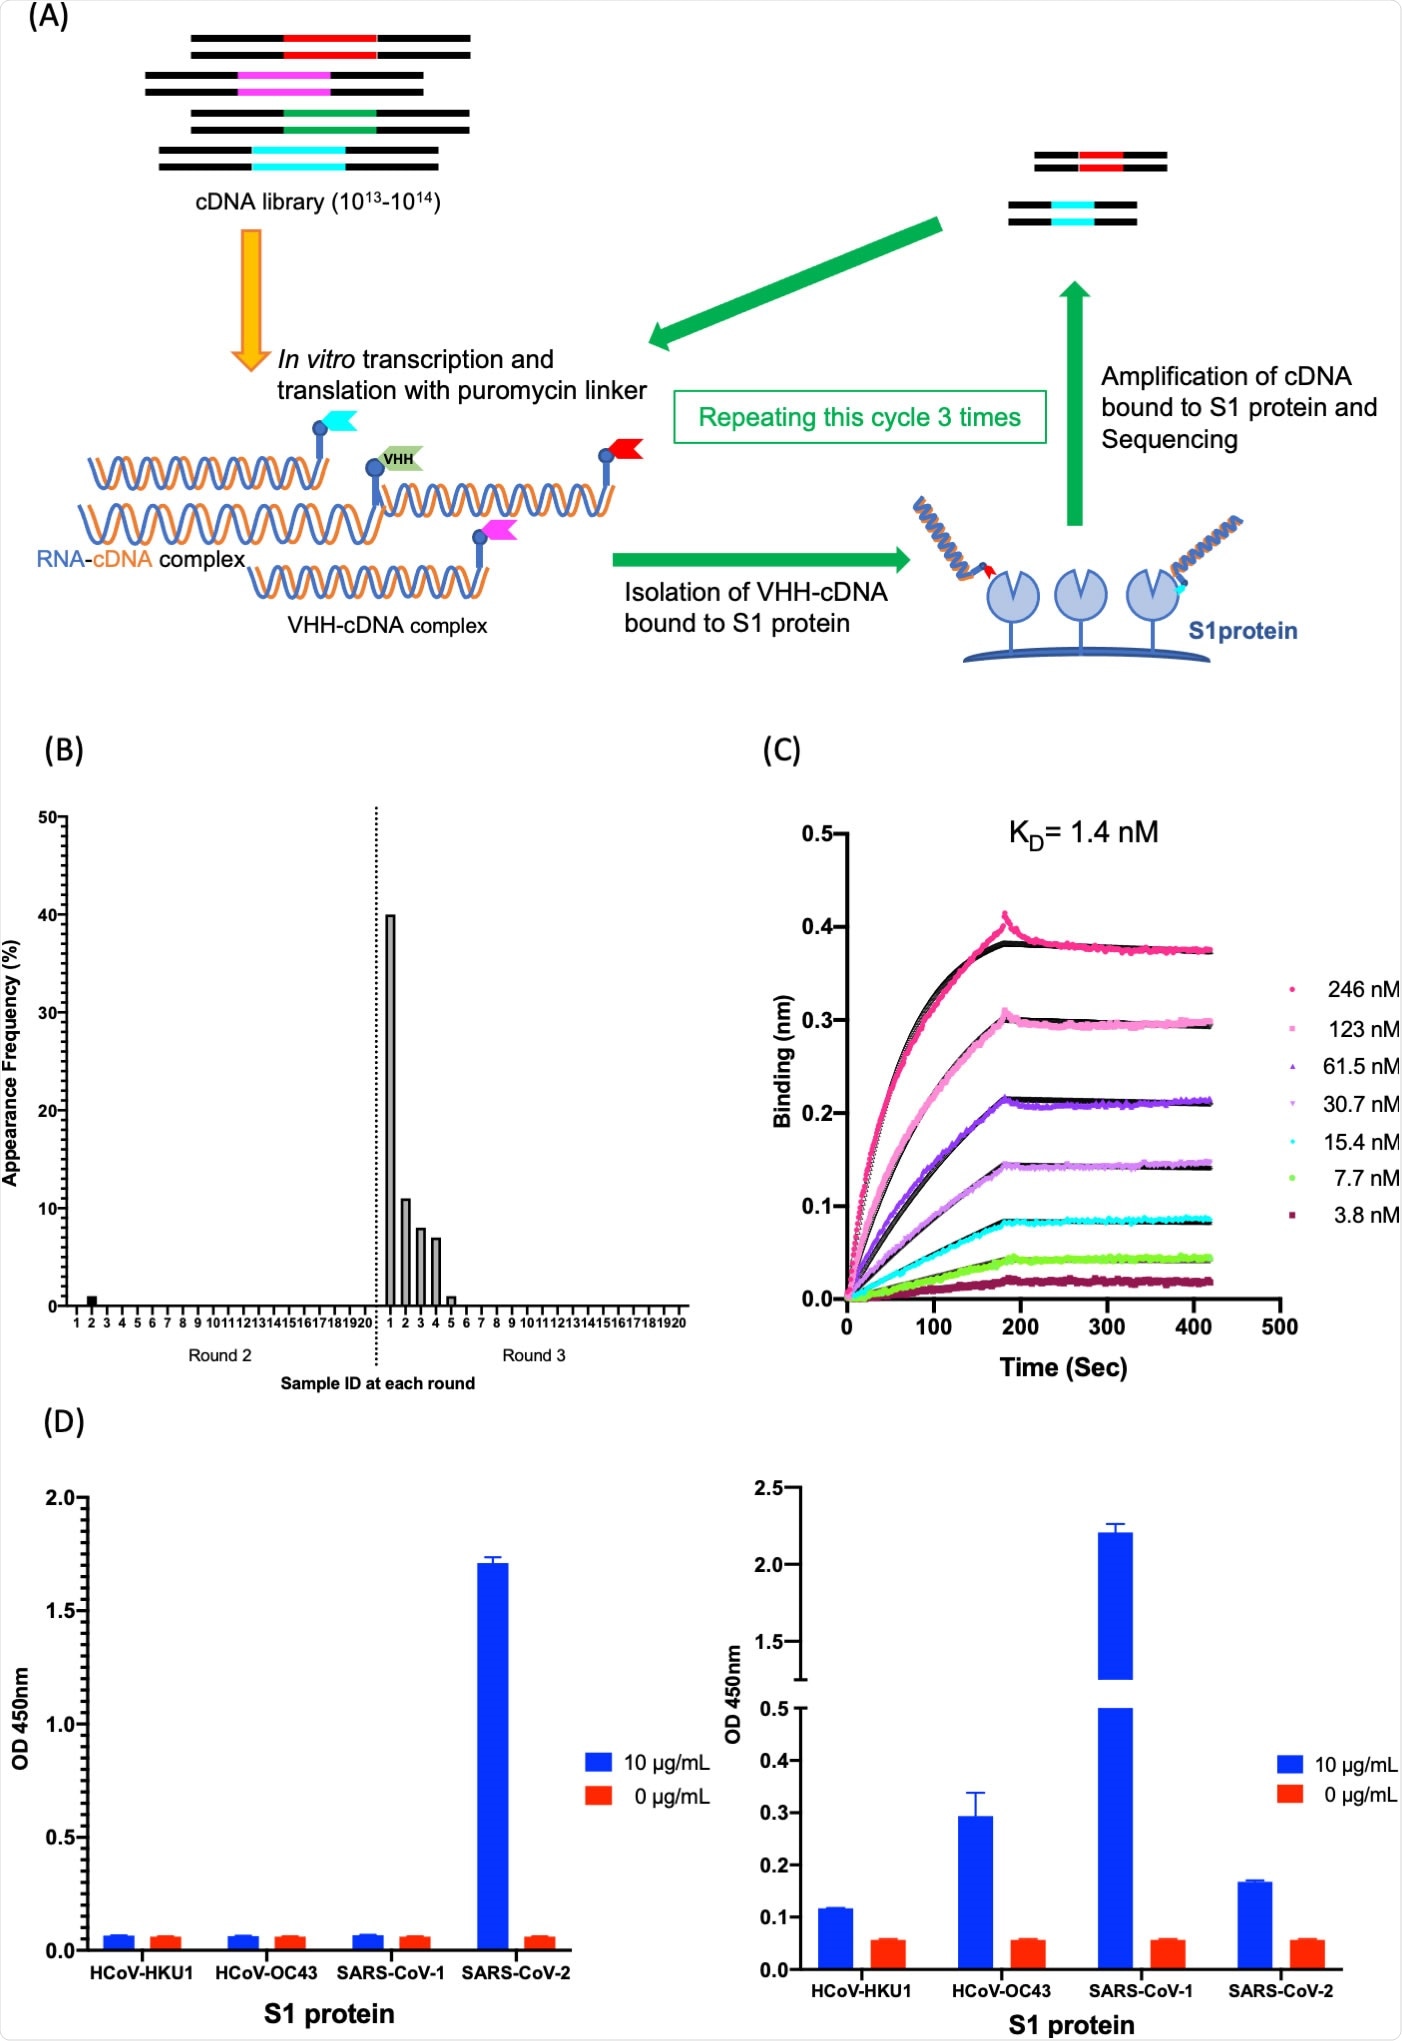 Isolation and characterization of K-874A. (A) Schematic showing in vitro selection of VHHs against SARS-CoV-2 S1 protein using VHH-cDNA display. In vitro transcription and translation of VHH-cDNA library form VHH linked to its mRNA with a puromycin linker. cDNA of linked mRNA was reverse-transcribed and VHH-cDNA complex was produced. High-affinity VHH-cDNA complex to immobilized S1 protein was isolated, and its cDNA was amplified. Three rounds of selection were performed, cDNA libraries from rounds 2 and 3 were sequenced, and anti-SARS-CoV-2 VHH candidates were translated. (B) Frequency distribution of amino acid sequences corresponding to VHH antibody candidates targeting SARS-CoV-2 S1 subunits in the selected VHH libraries. Sample ID “1” with the highest frequency (39.5%) is clone K-874A. (C) Binding affinity of K-874A to SARS-CoV-2 S1 subunits. Biolayer interferometry sensorgram measures the apparent binding affinity of K-874A-6xHis to immobilized SARS-CoV-2 S1 fused with sheep Fc. Binding curves for different concentrations of K-874A are shown in different colors. The black curves are 1:1 fits of the data. (D) Direct antigen ELISA measuring the binding affinity of FLAG-tagged K-874A to immobilized S1-6xHis subunits of beta-coronaviruses (HCoV-HKU1, HCoV-OC43, SARS-CoV-1, SARS-CoV-2) (left). Each immobilized S1-6xHis subunit was detected by anti-His antibody (right). Error bars are mean ± SD (N = 3). Data are from a representative experiment of three independent experiments.